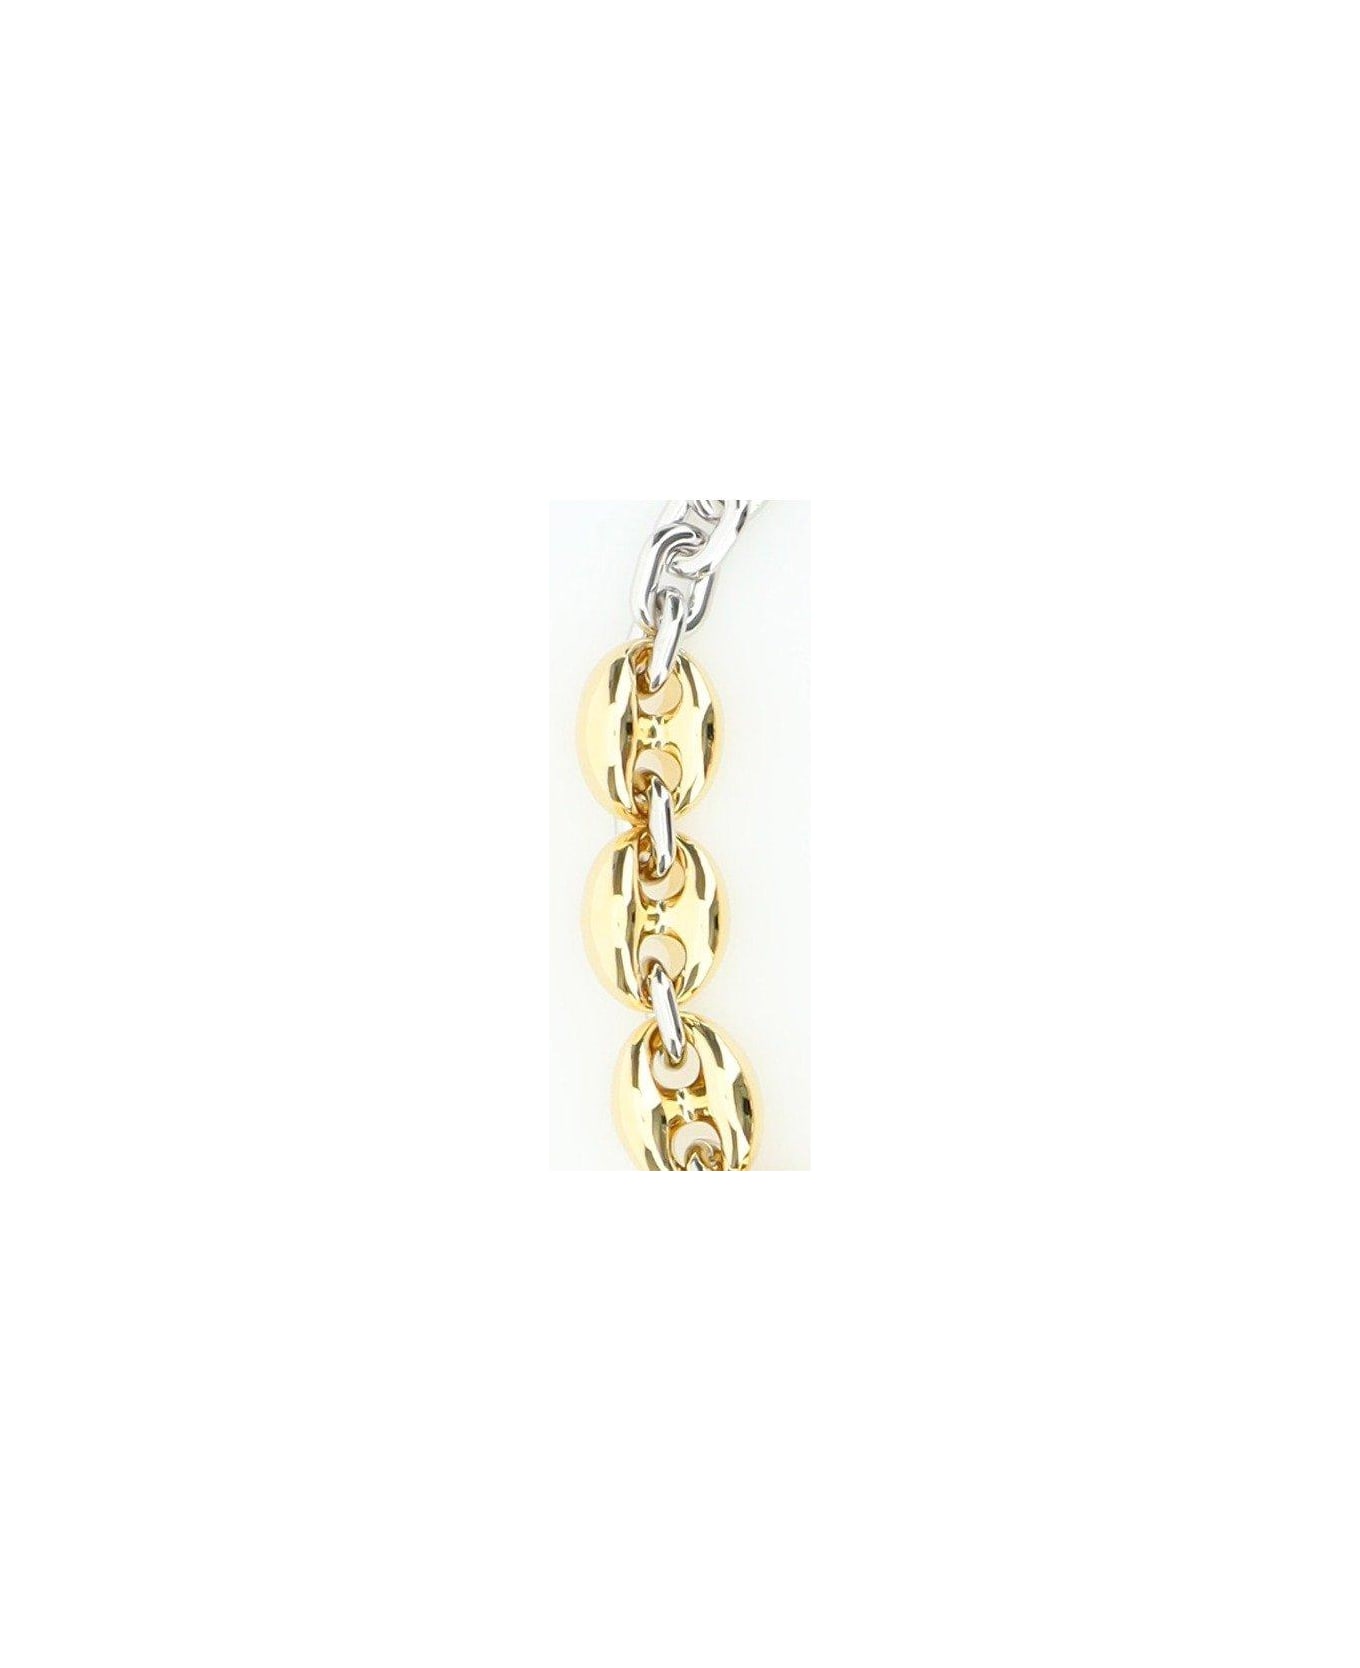 Paco Rabanne 'x Eight' Necklace - Gold Silver